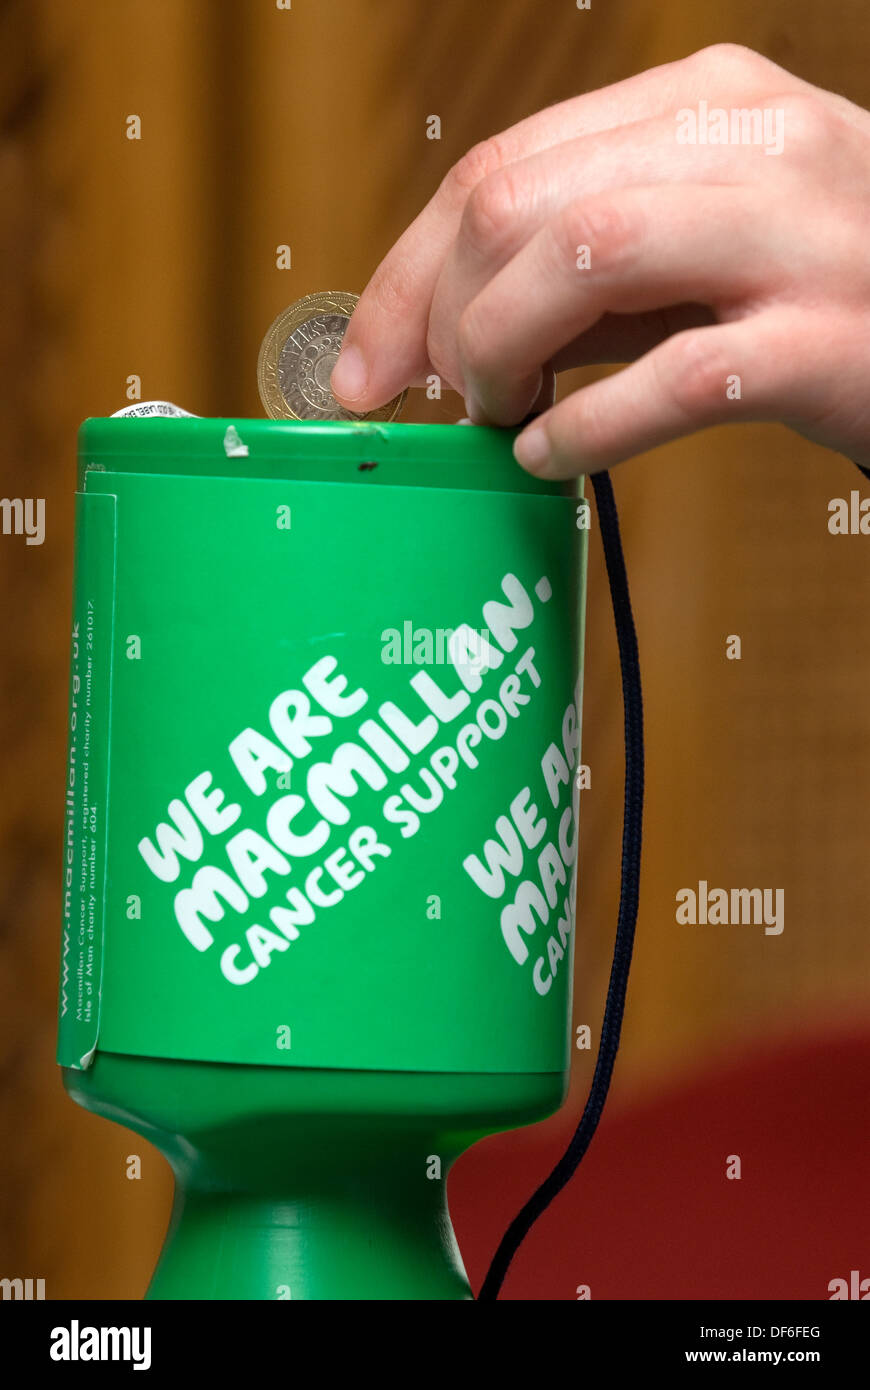 Making a £2 donation to Macmillan Cancer Support, Surrey, UK. Stock Photo